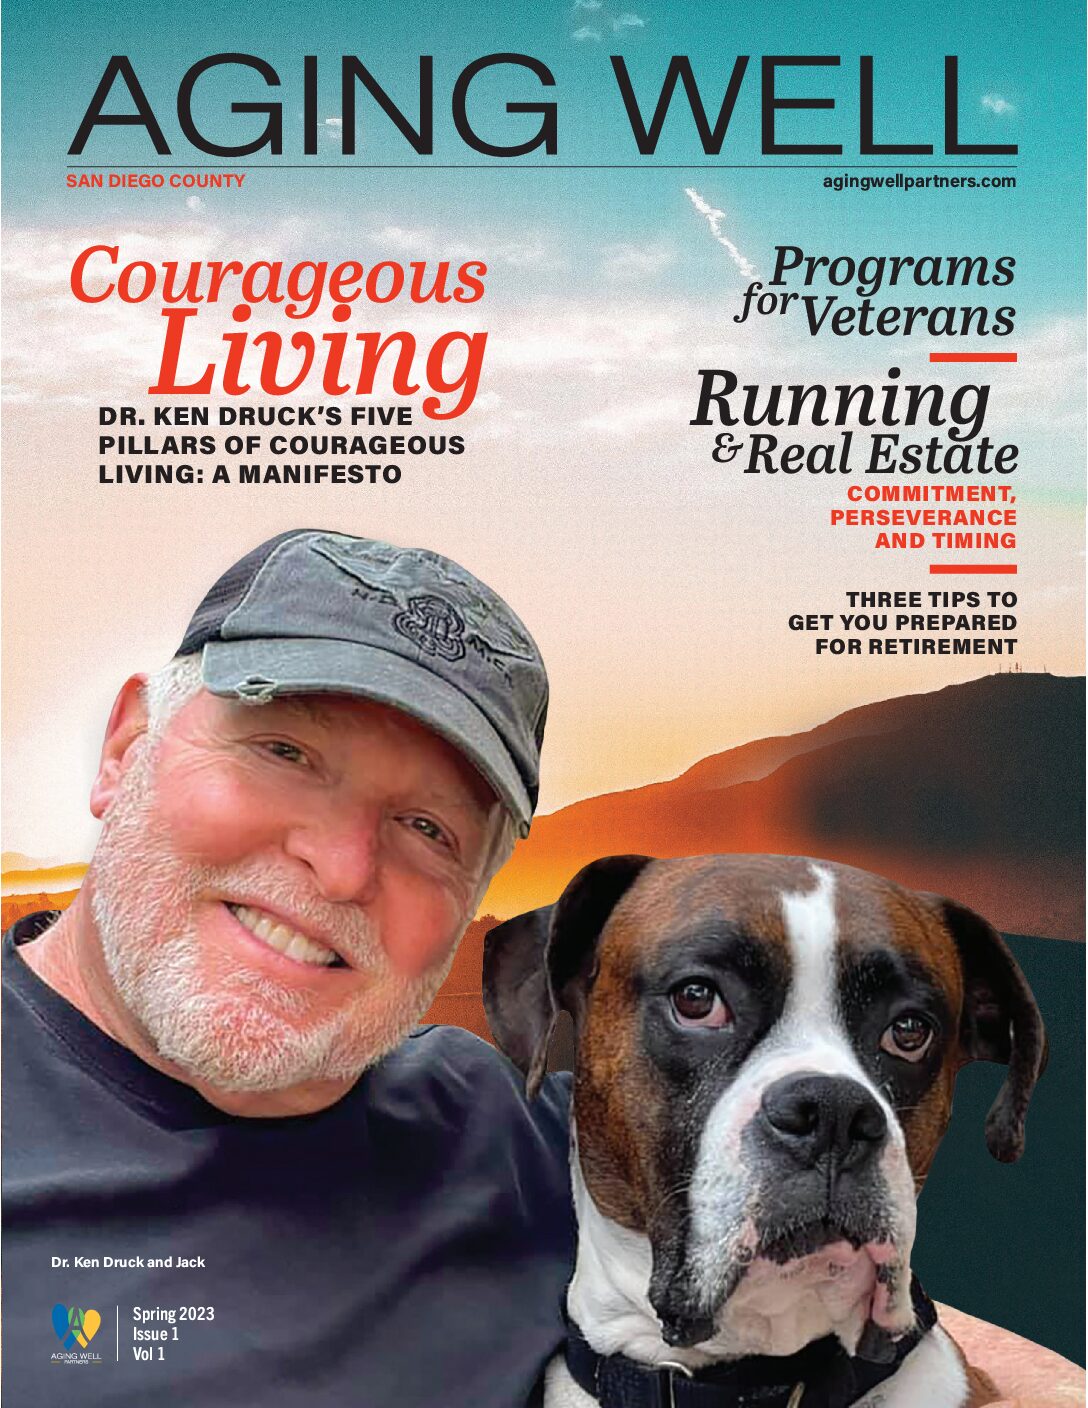 Aging Well Magazine is Here!